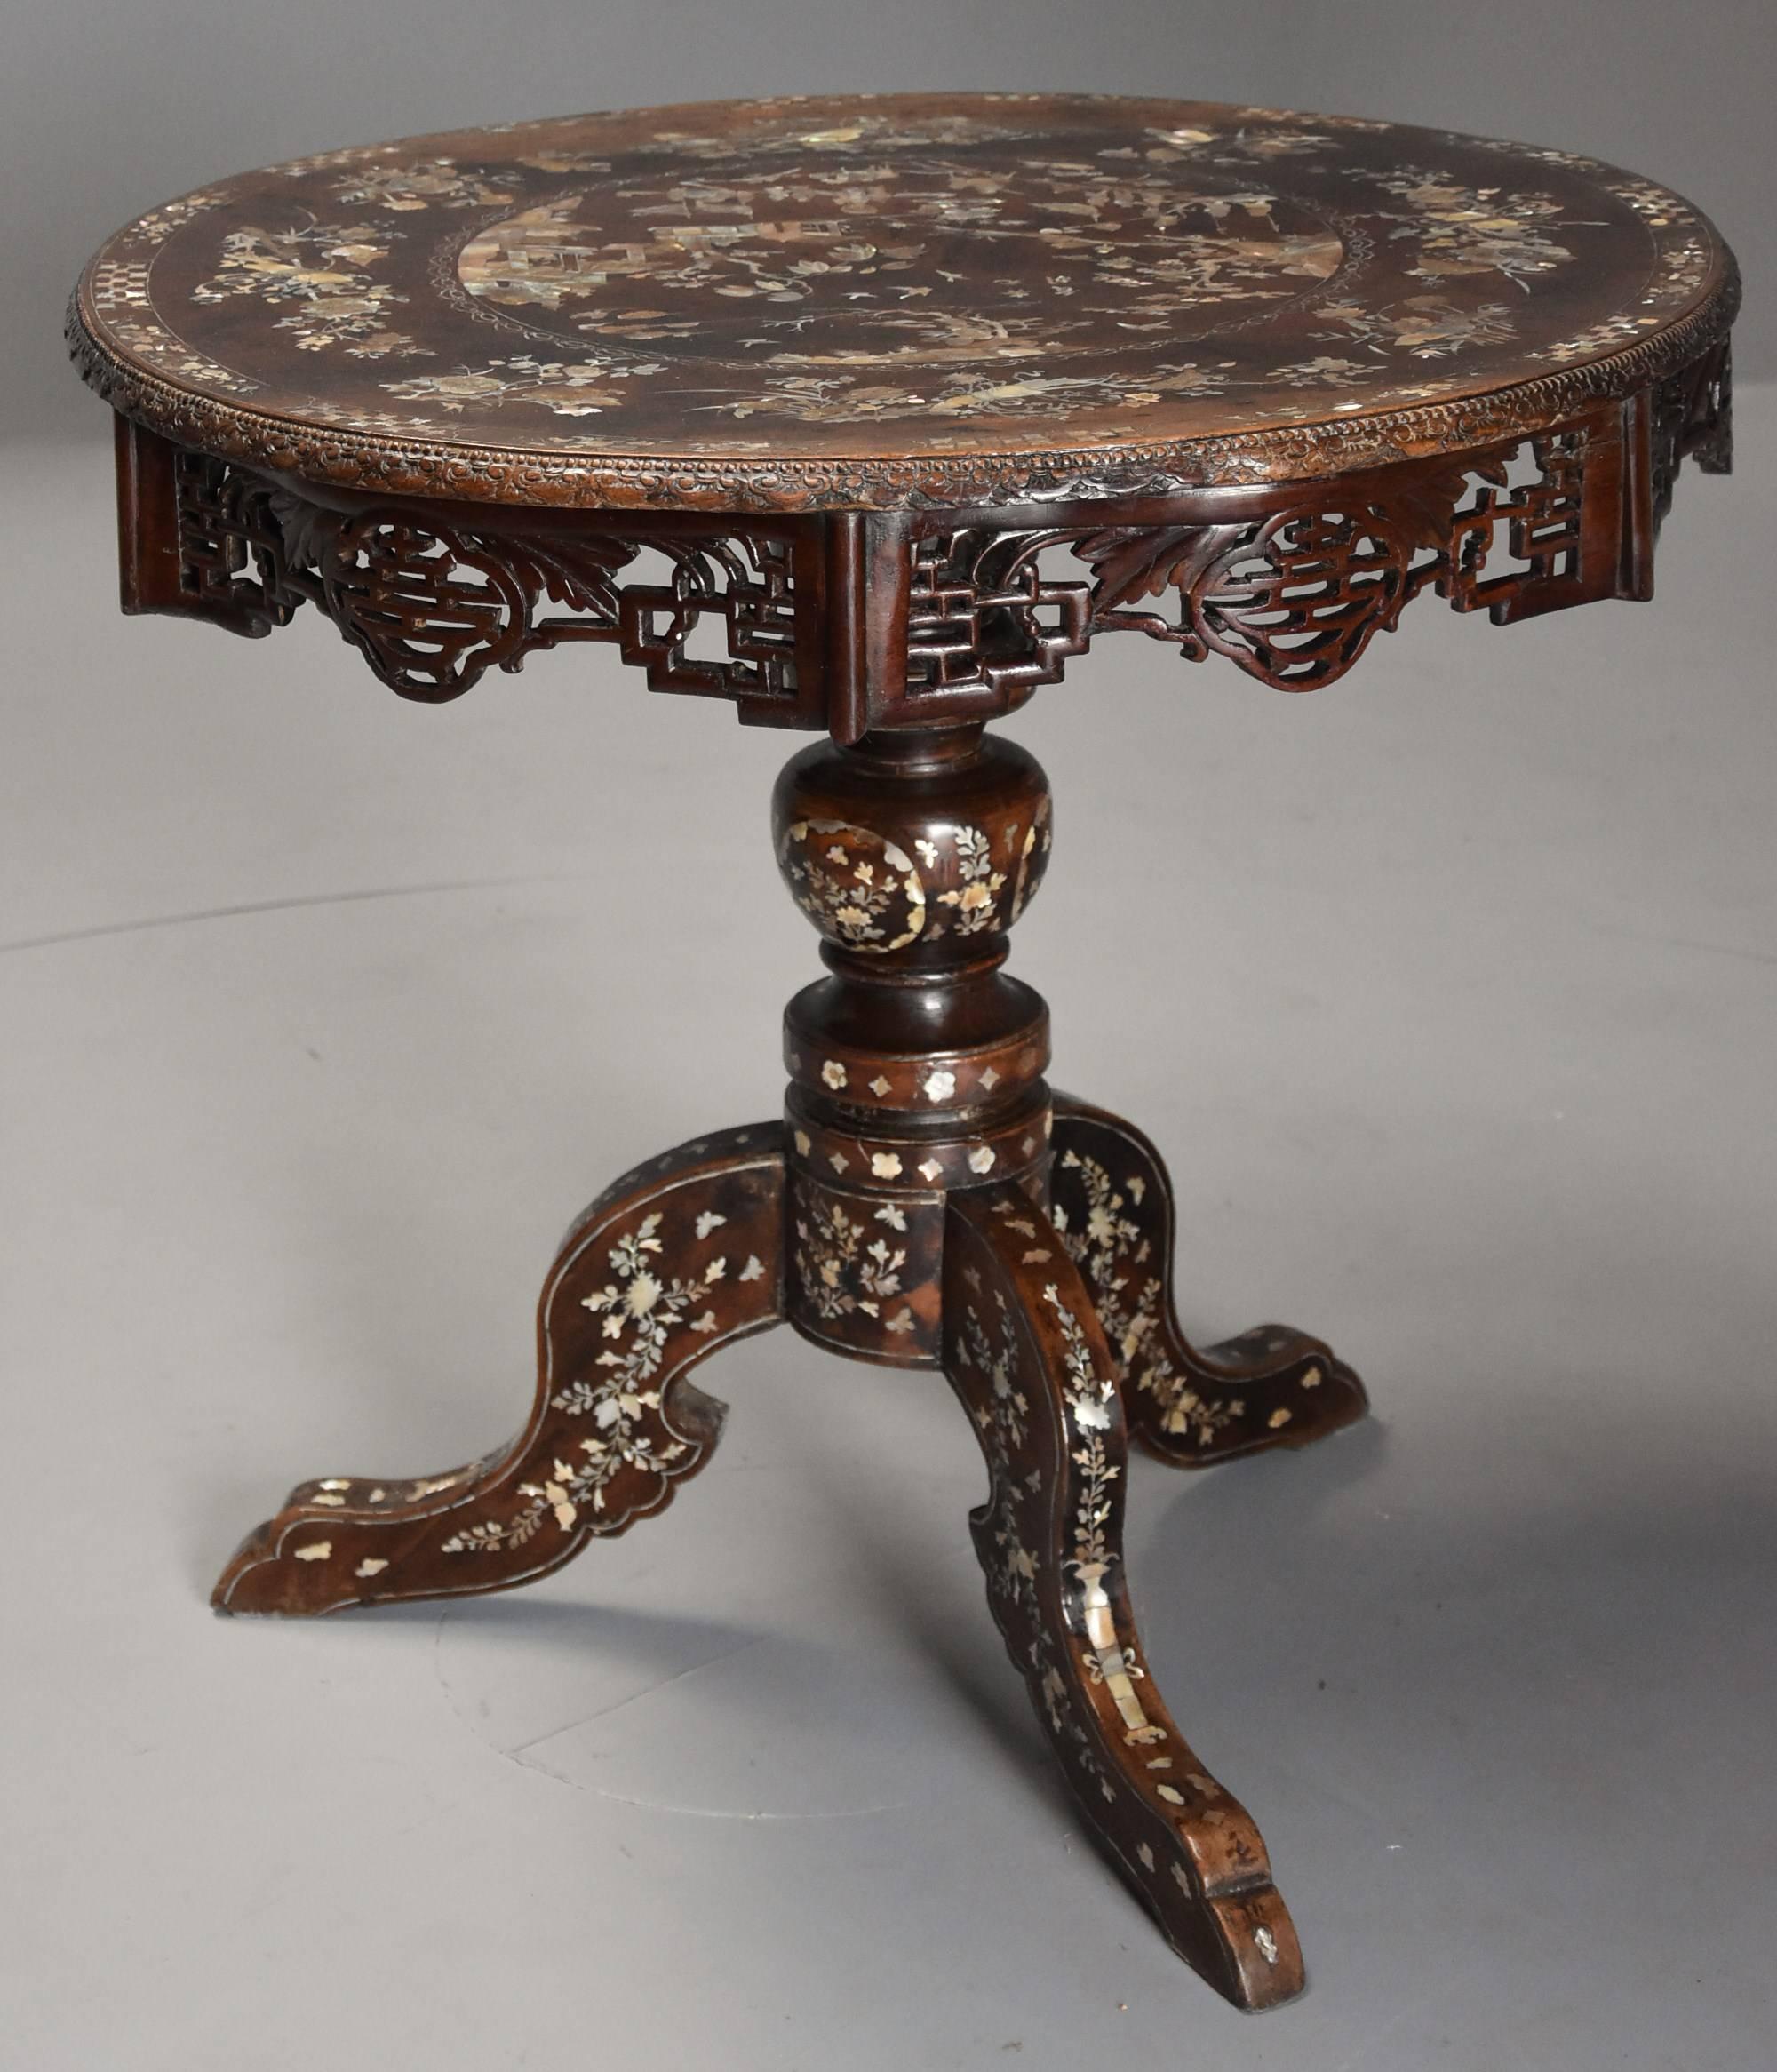 A highly decorative late 19th century Vietnamese hardwood veneered circular centre table profusely inlaid with superb quality engraved mother-of-pearl decoration.

This table consists of a circular burr hardwood veneered top with central circular